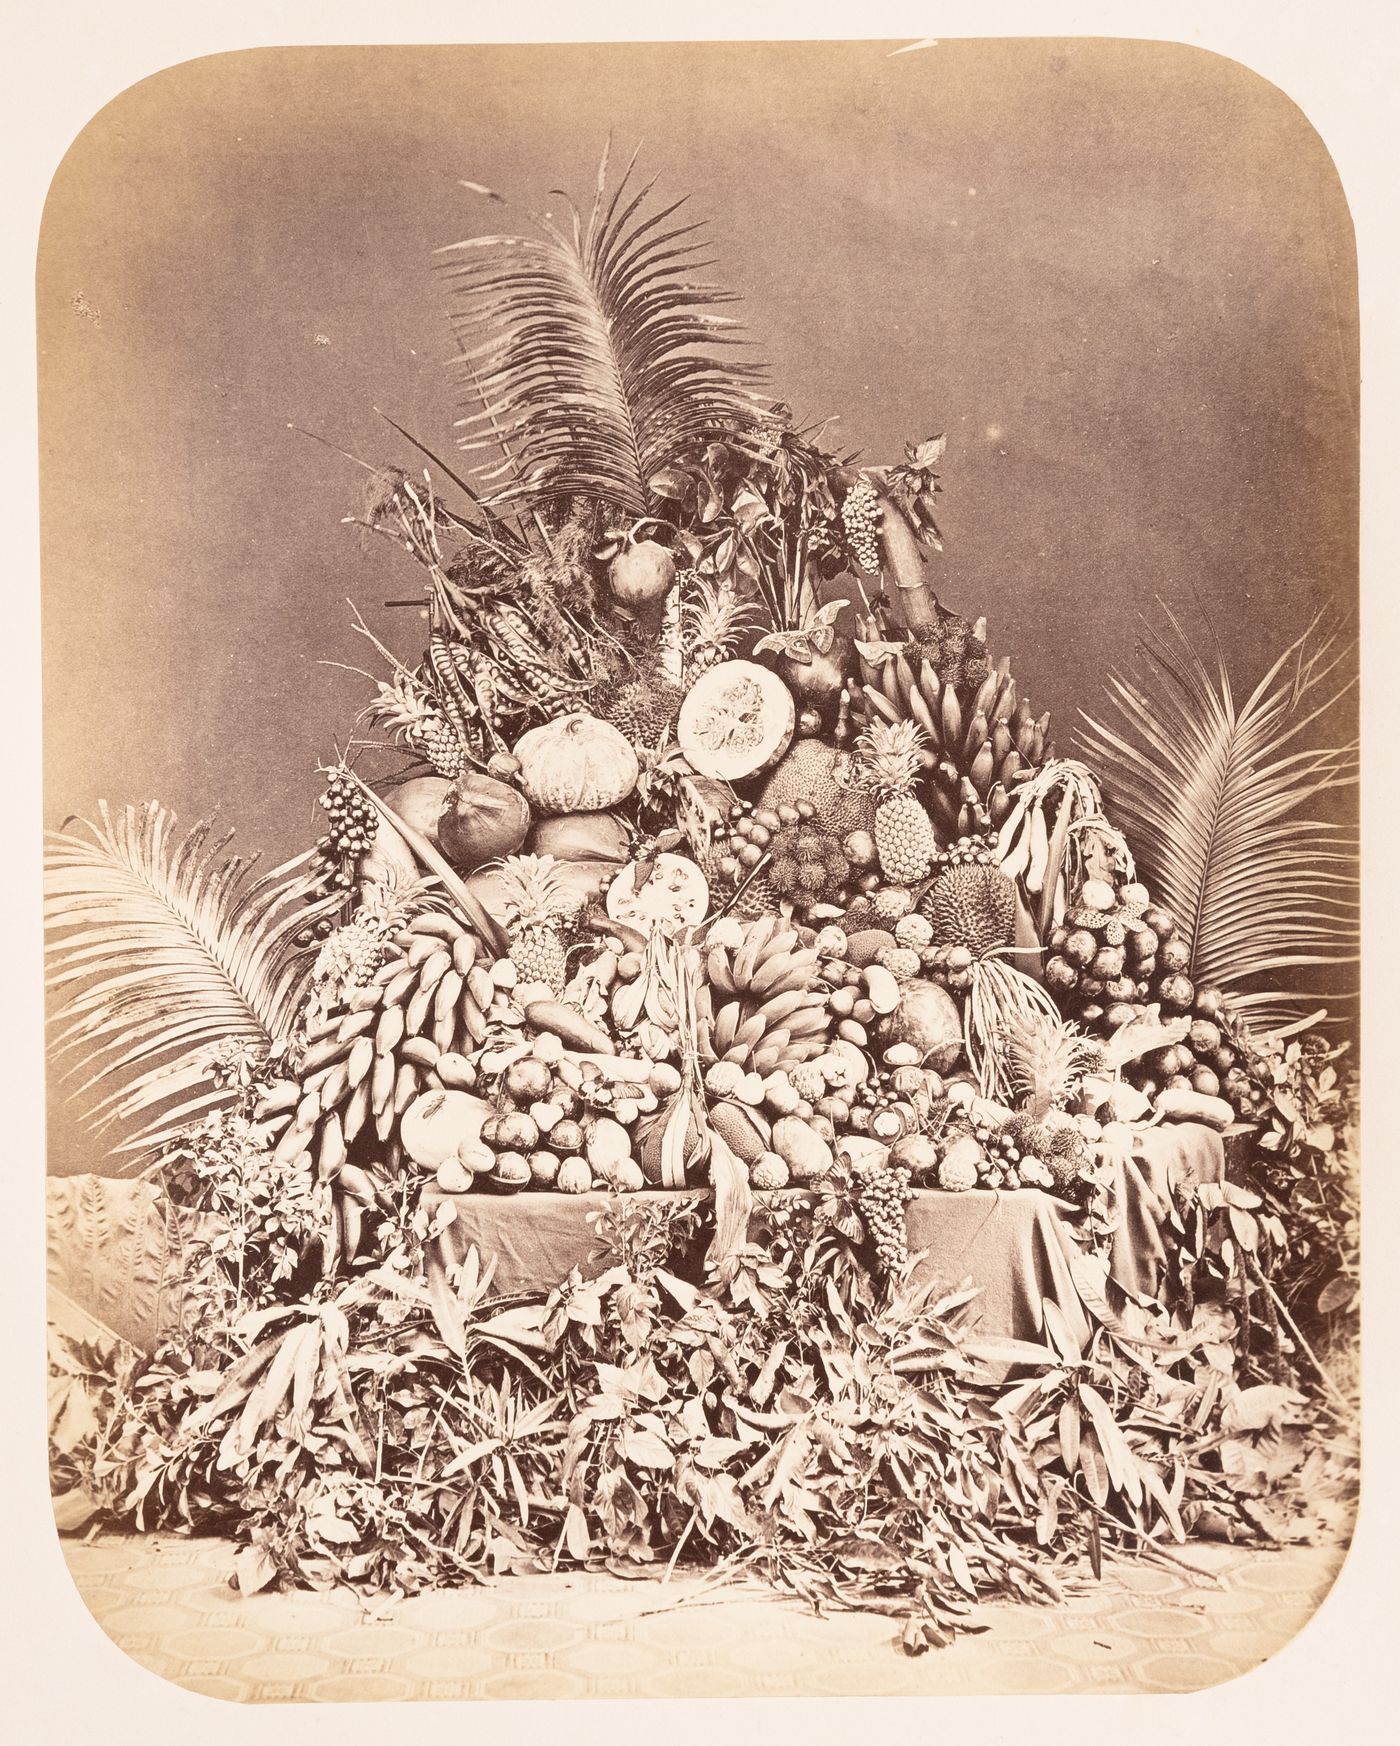 View of an arrangement of fruit and plants, Dutch East Indies (now Indonesia)